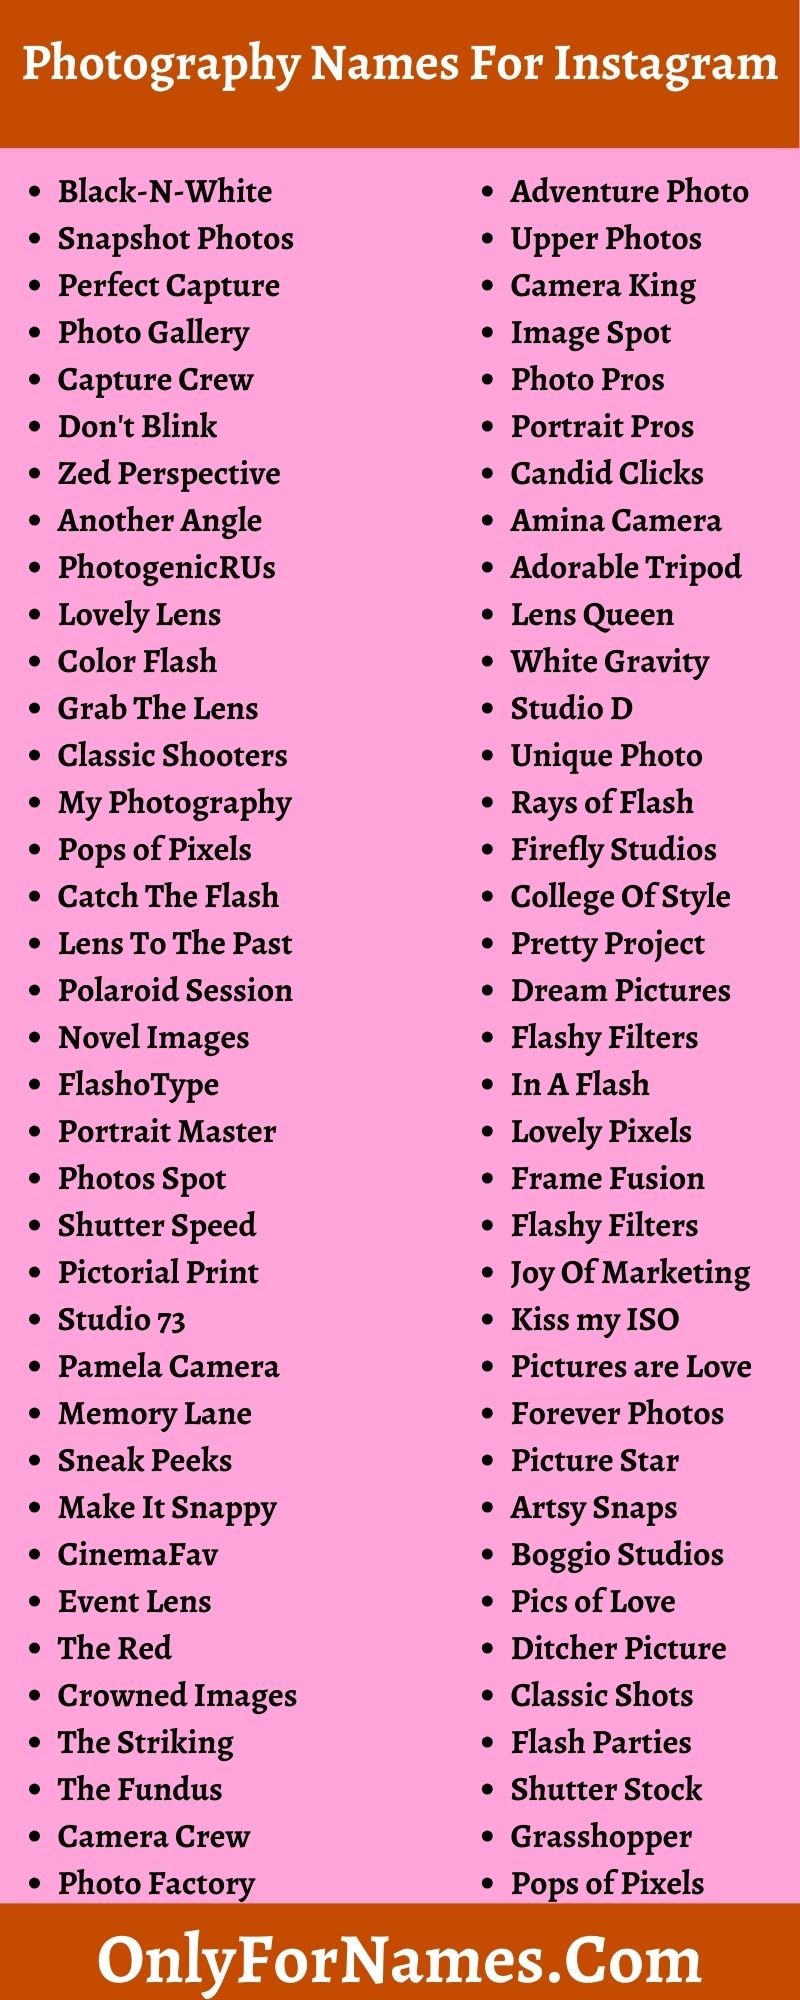 Photography Names For Instagram